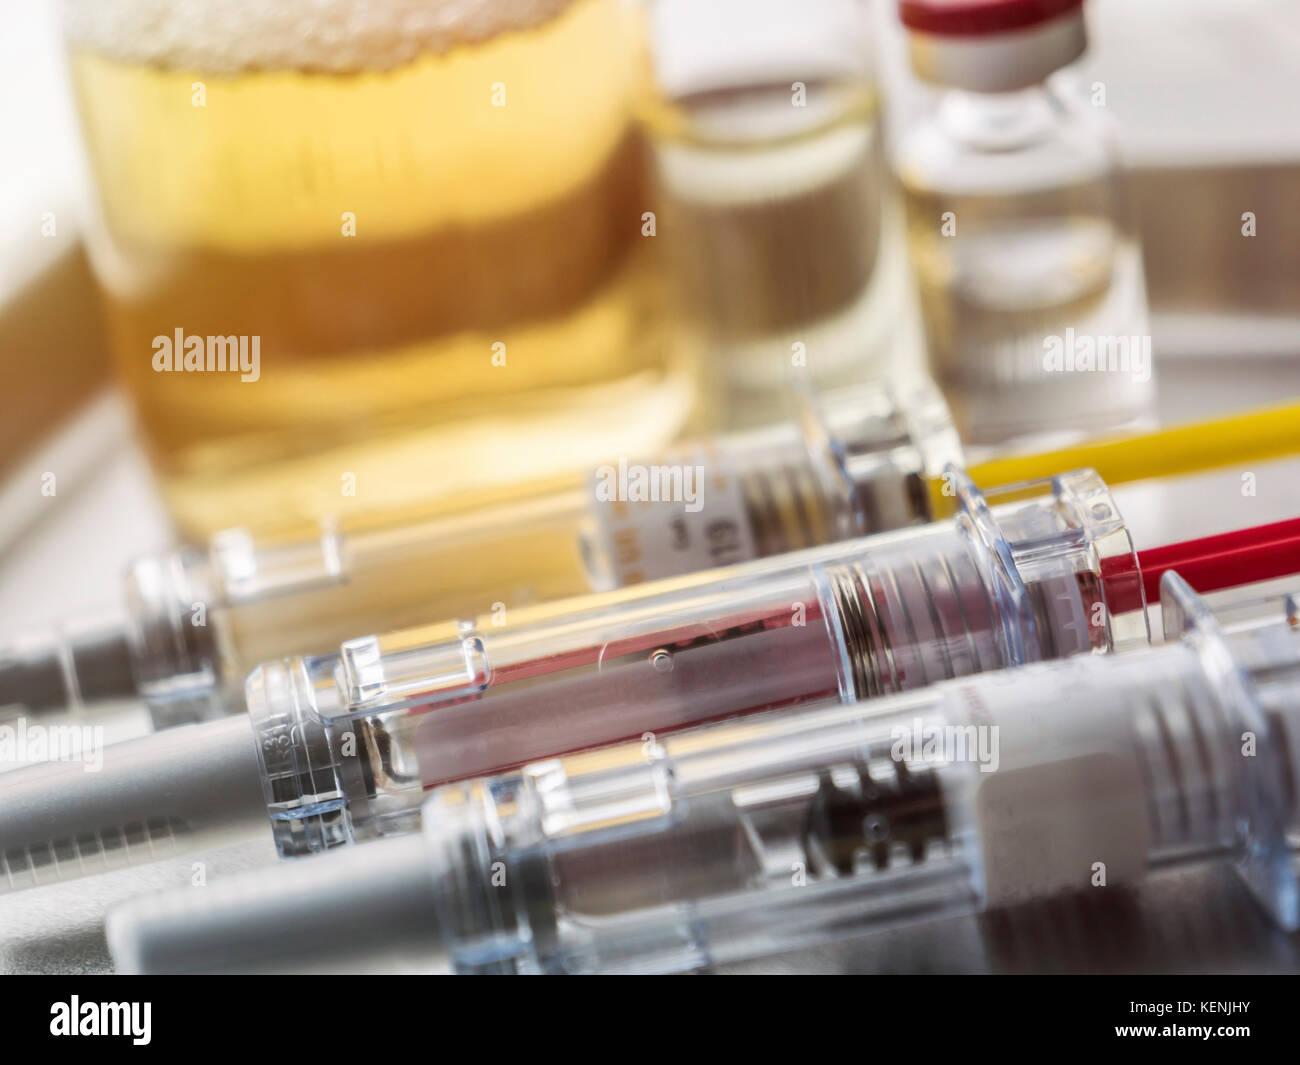 Several vials and syringe in laboratory, conceptual image Stock Photo